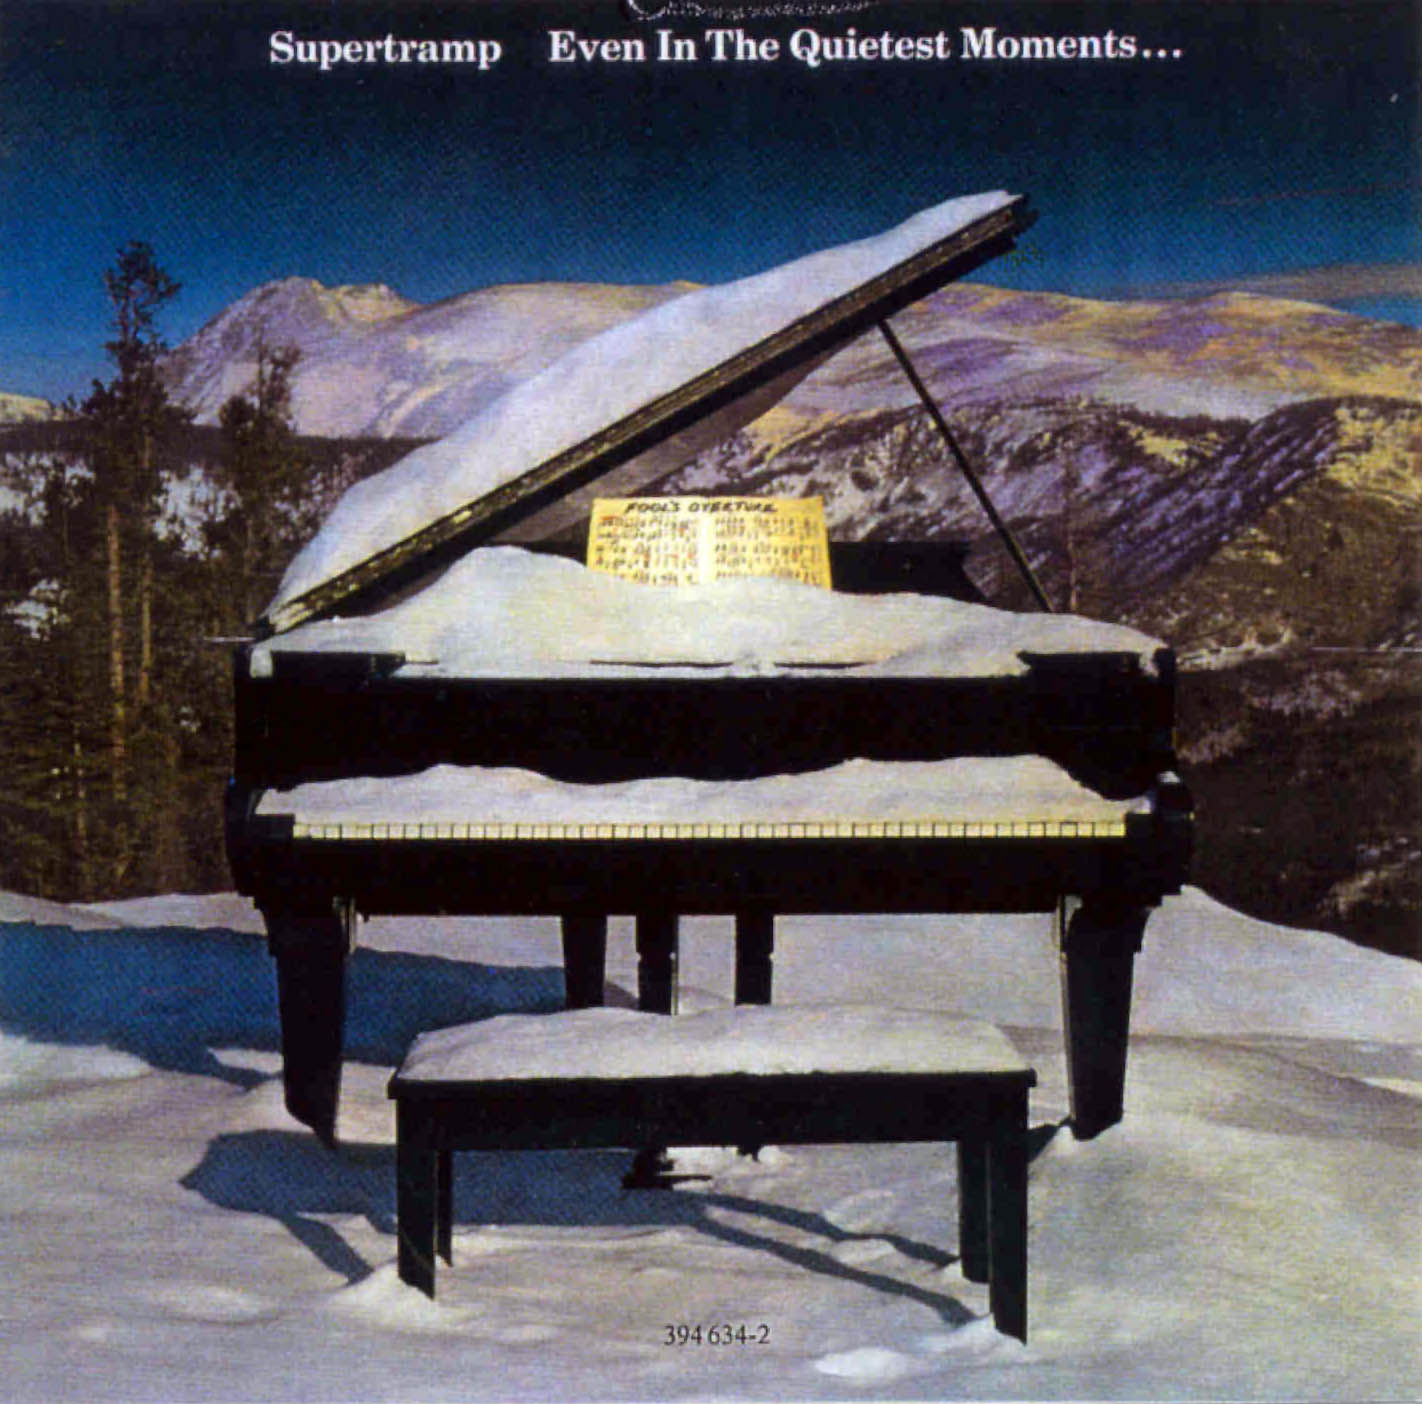 Supertramp+-+Even+in+the+Quietest+Moments+(1977).jpg